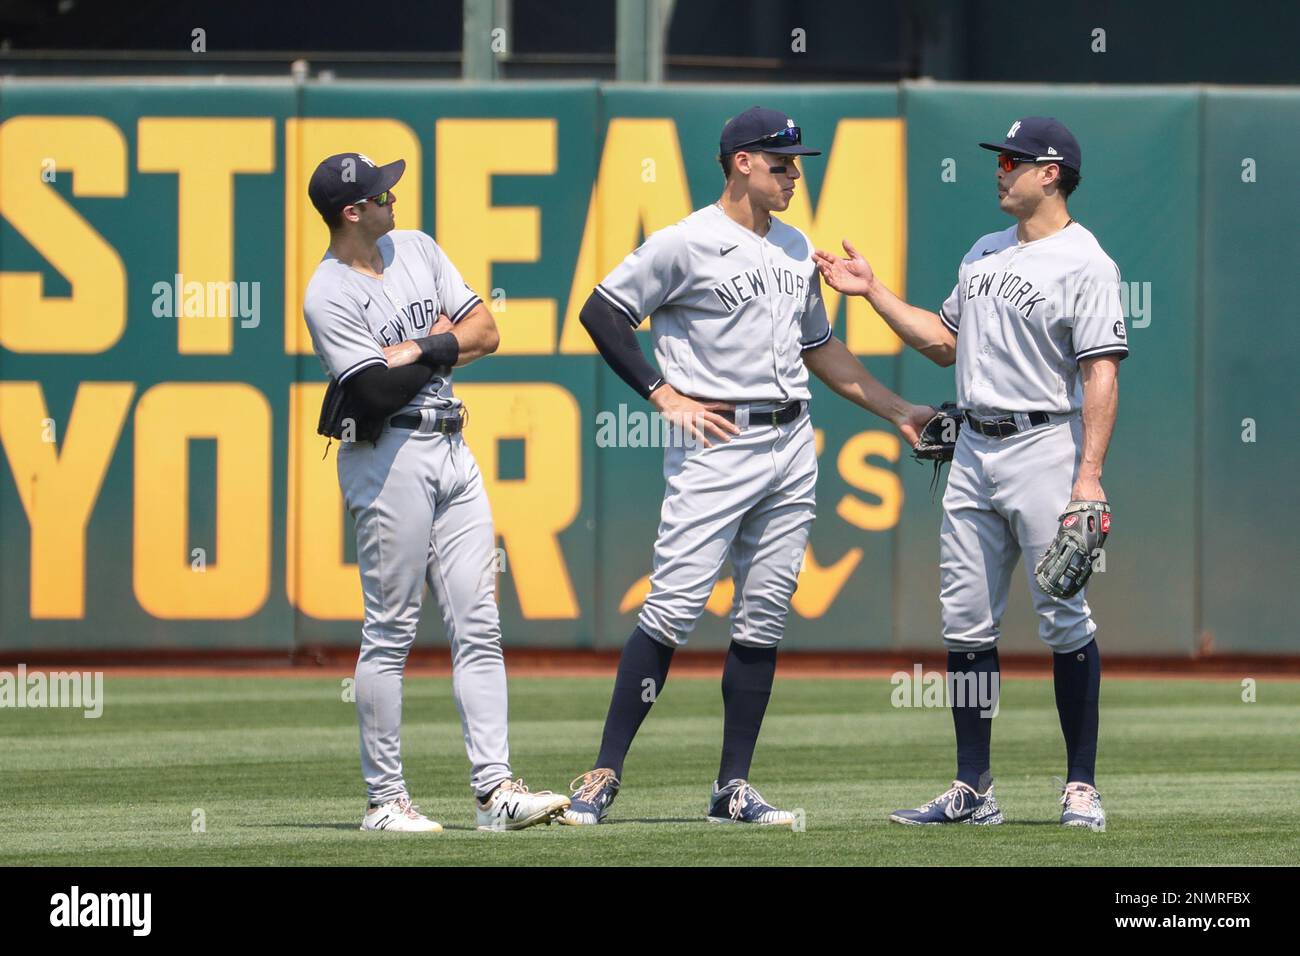 OAKLAND, CA - AUGUST 28: New York Yankees Outfielders Joey Gallo (13), Aaron  Judge (99), and Giancarlo Stanton (27) talks during the MLB game between  the New York Yankees and the Oakland